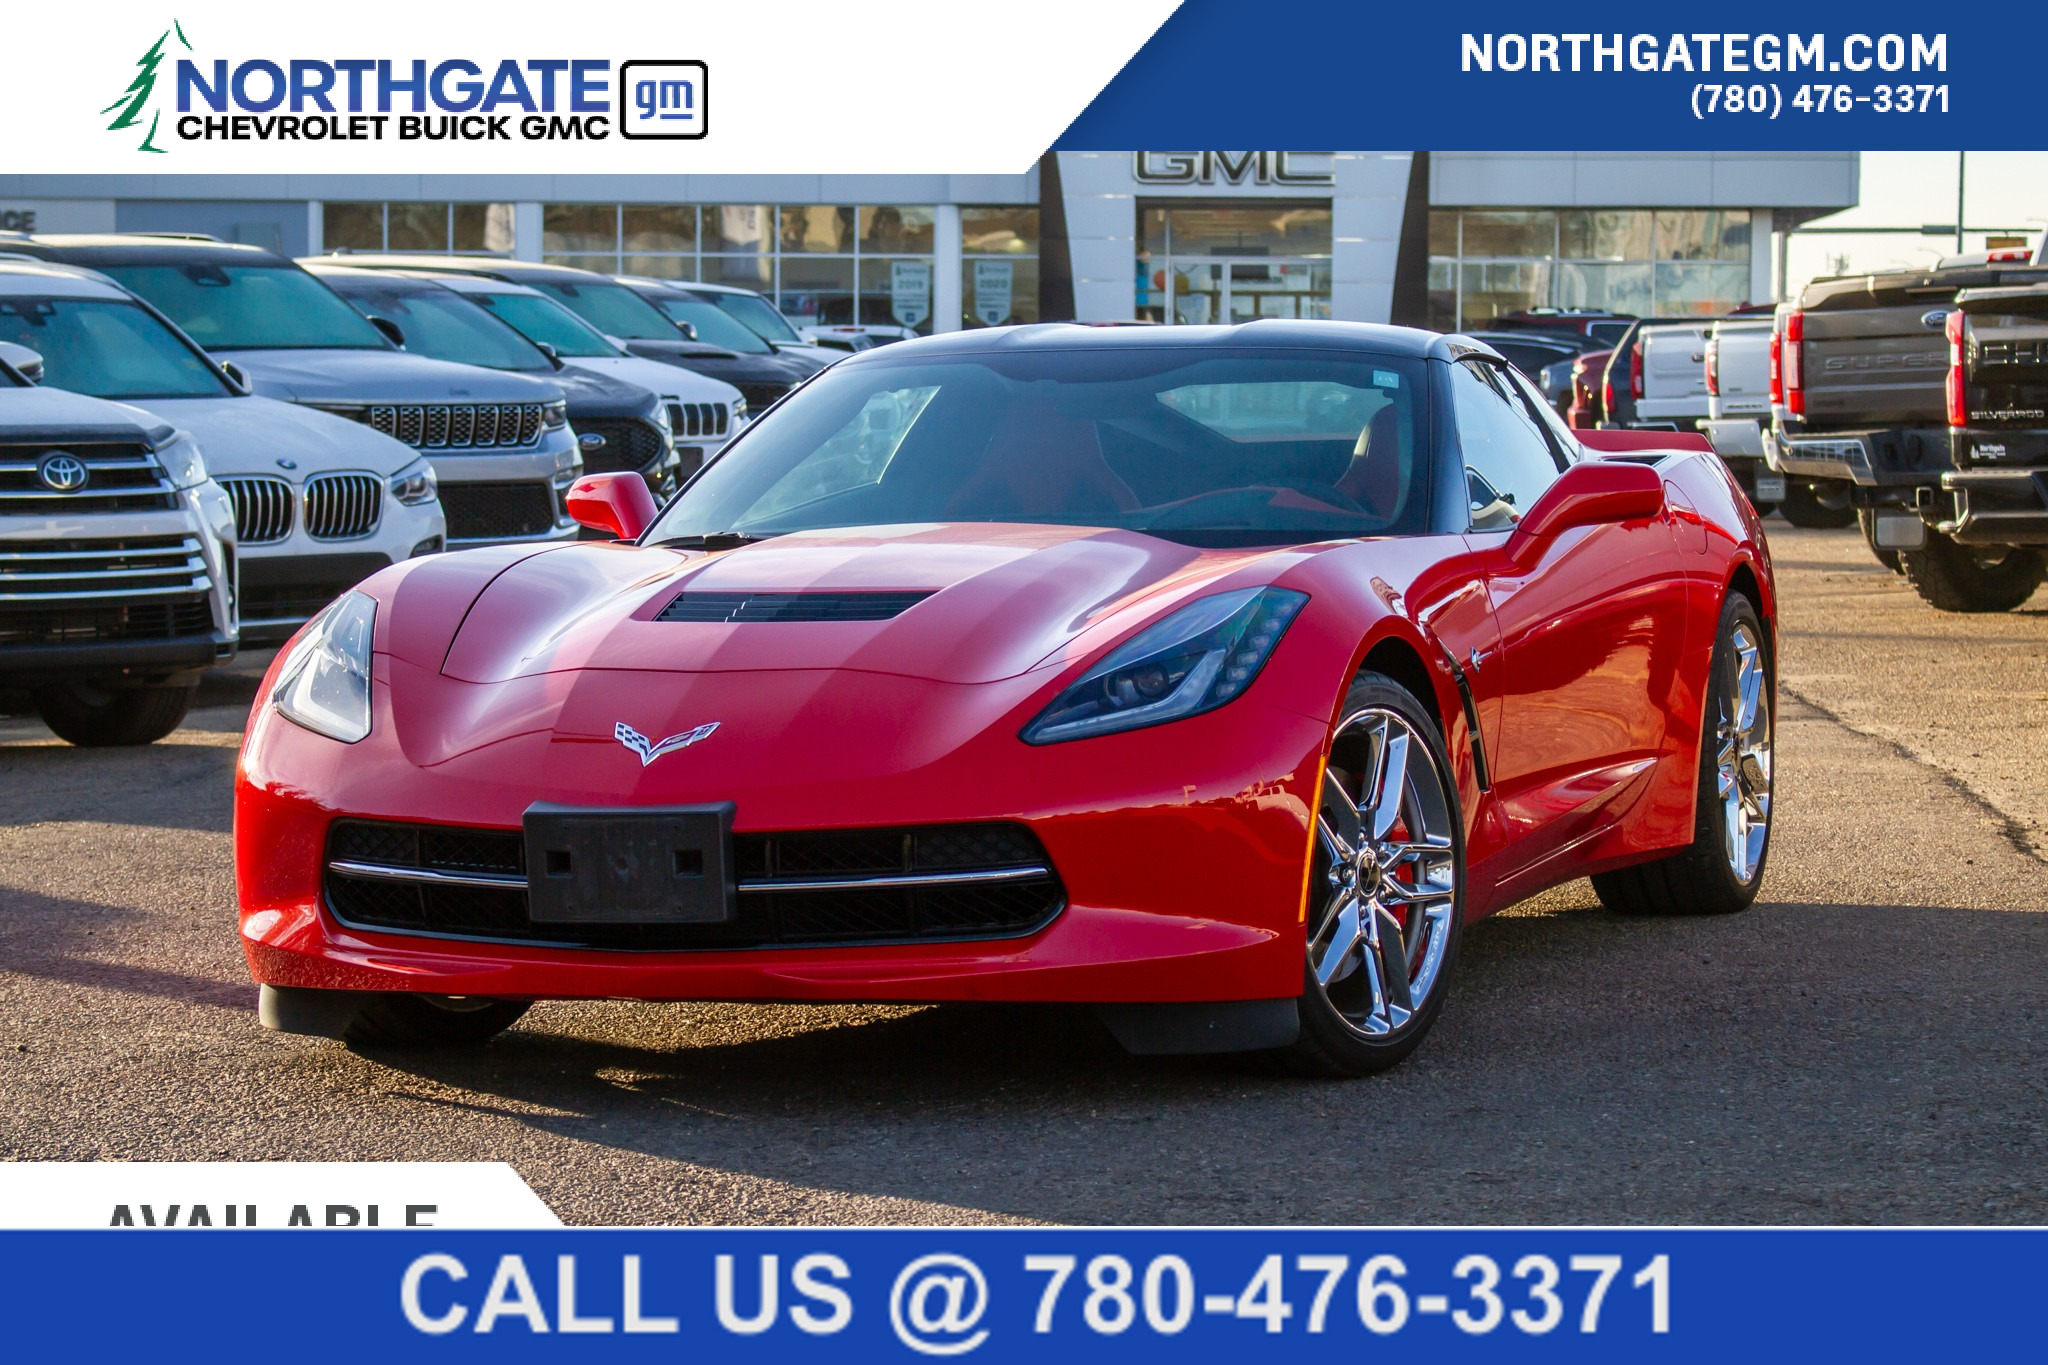 2014 Chevrolet Corvette Stingray Z51 455 HP | 6.2L | RED ON RED | 6-SPEED AUTO | A 